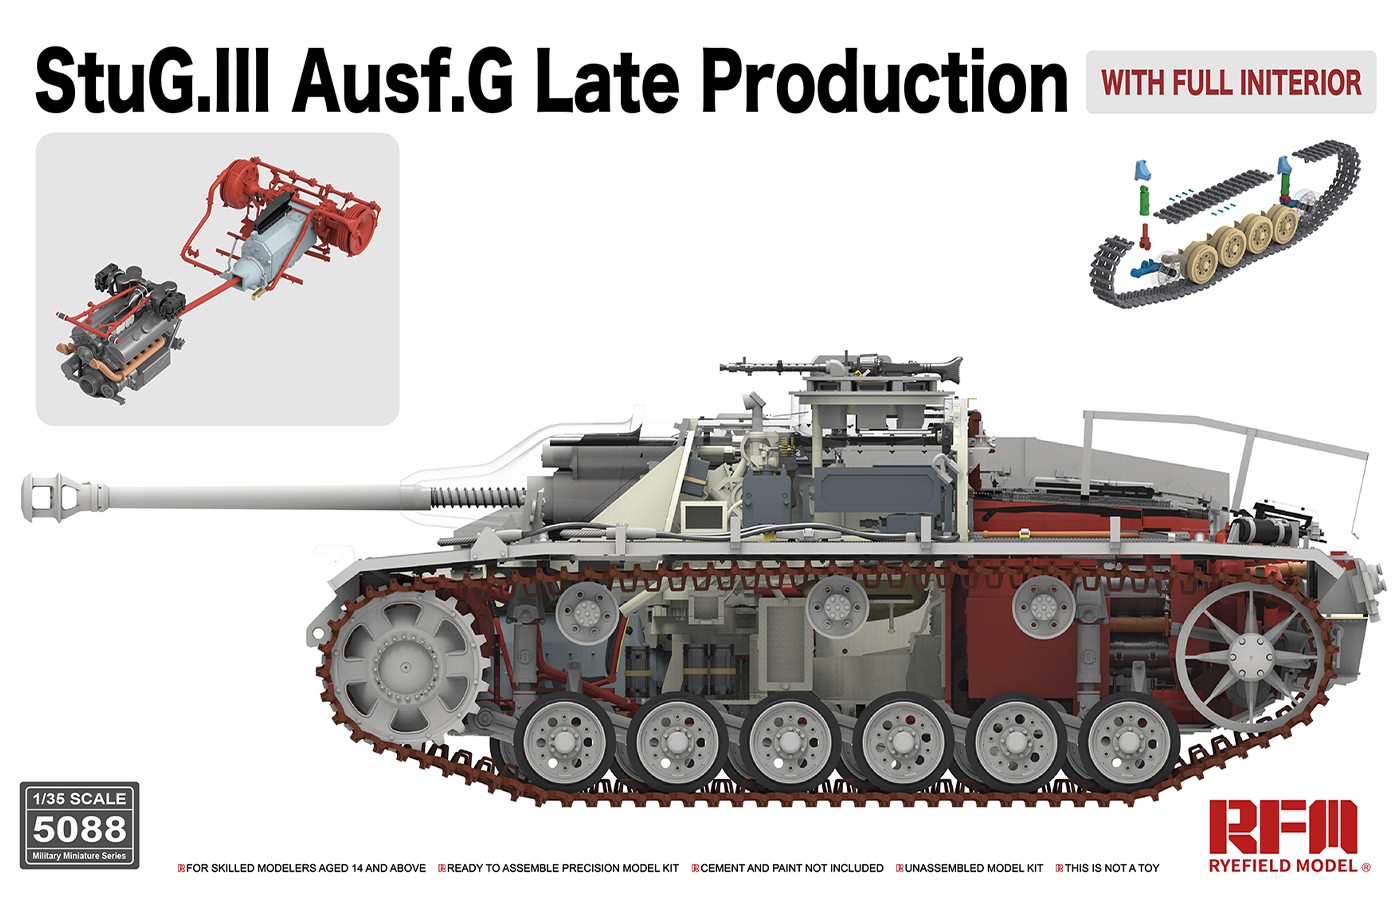 Fotografie 1/35 StuG.III Ausf.G Late Production with full interior